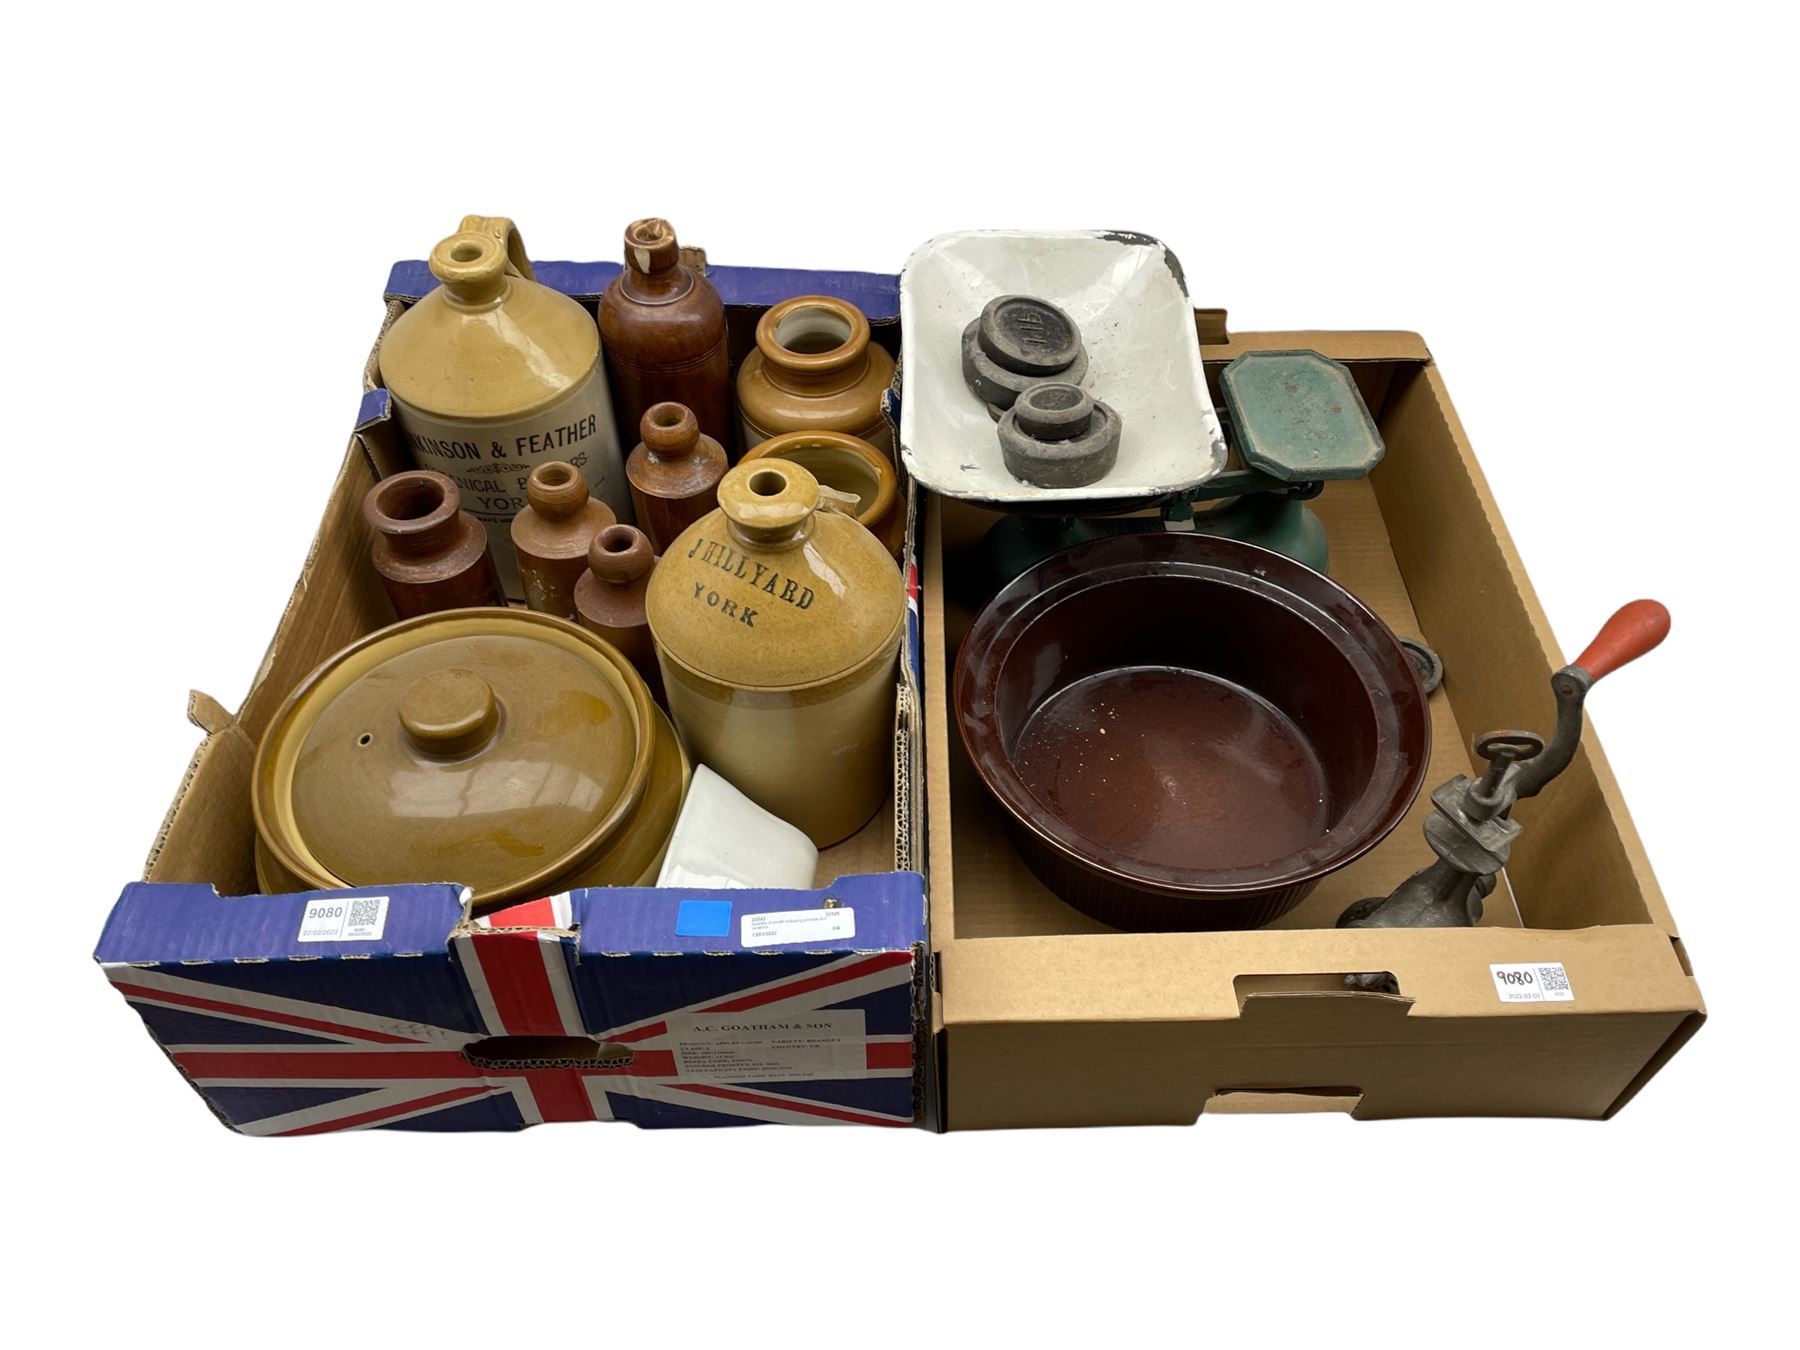 Local stoneware flagons including Sinkinson & Feather Botanical Brewers York